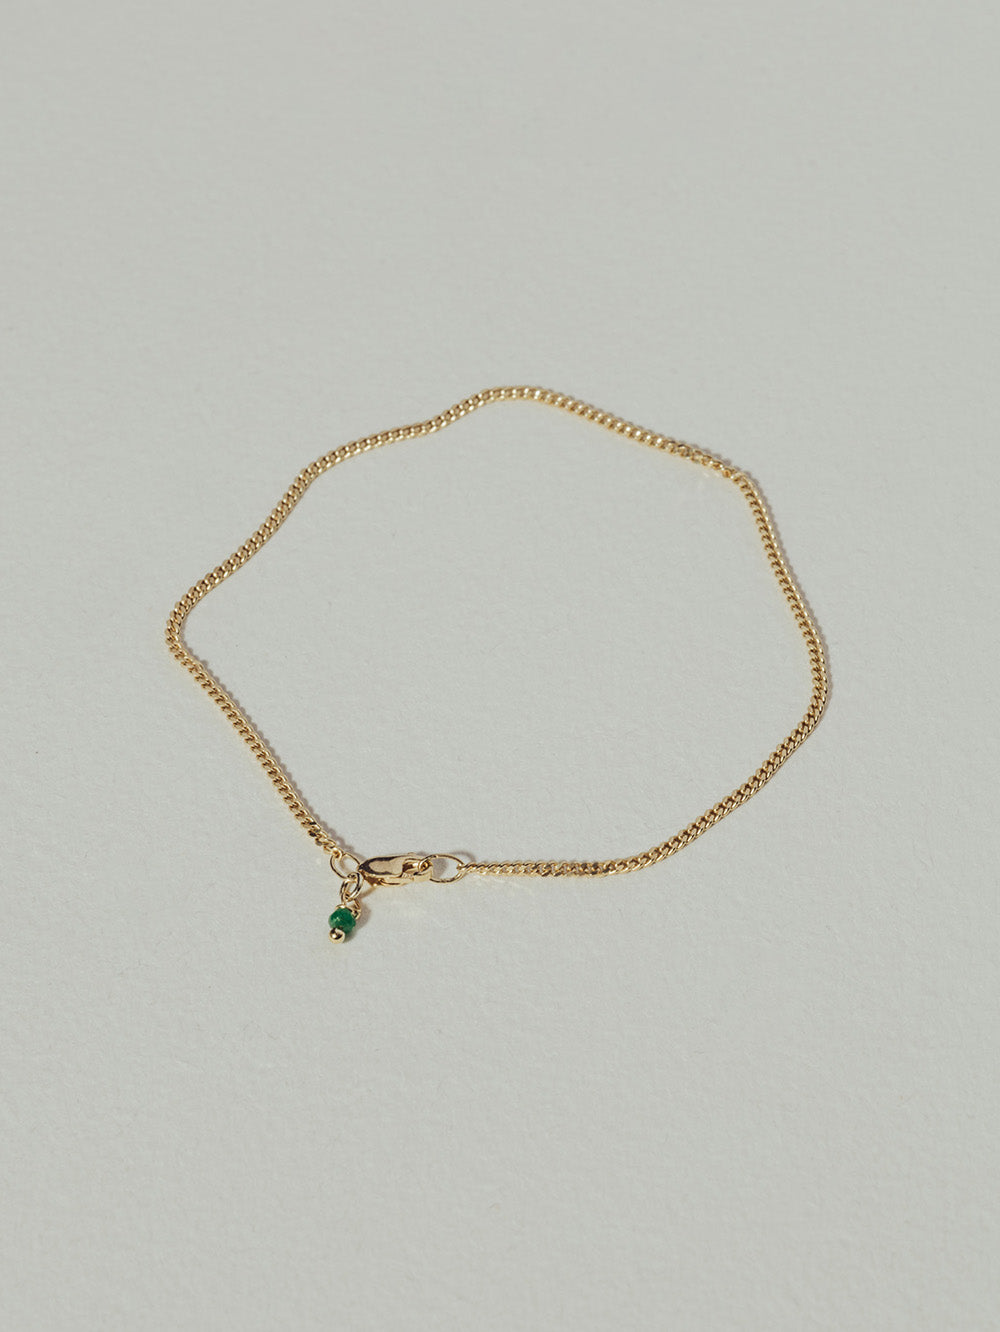 Birthstone May - Emerald | 14K Gold Plated